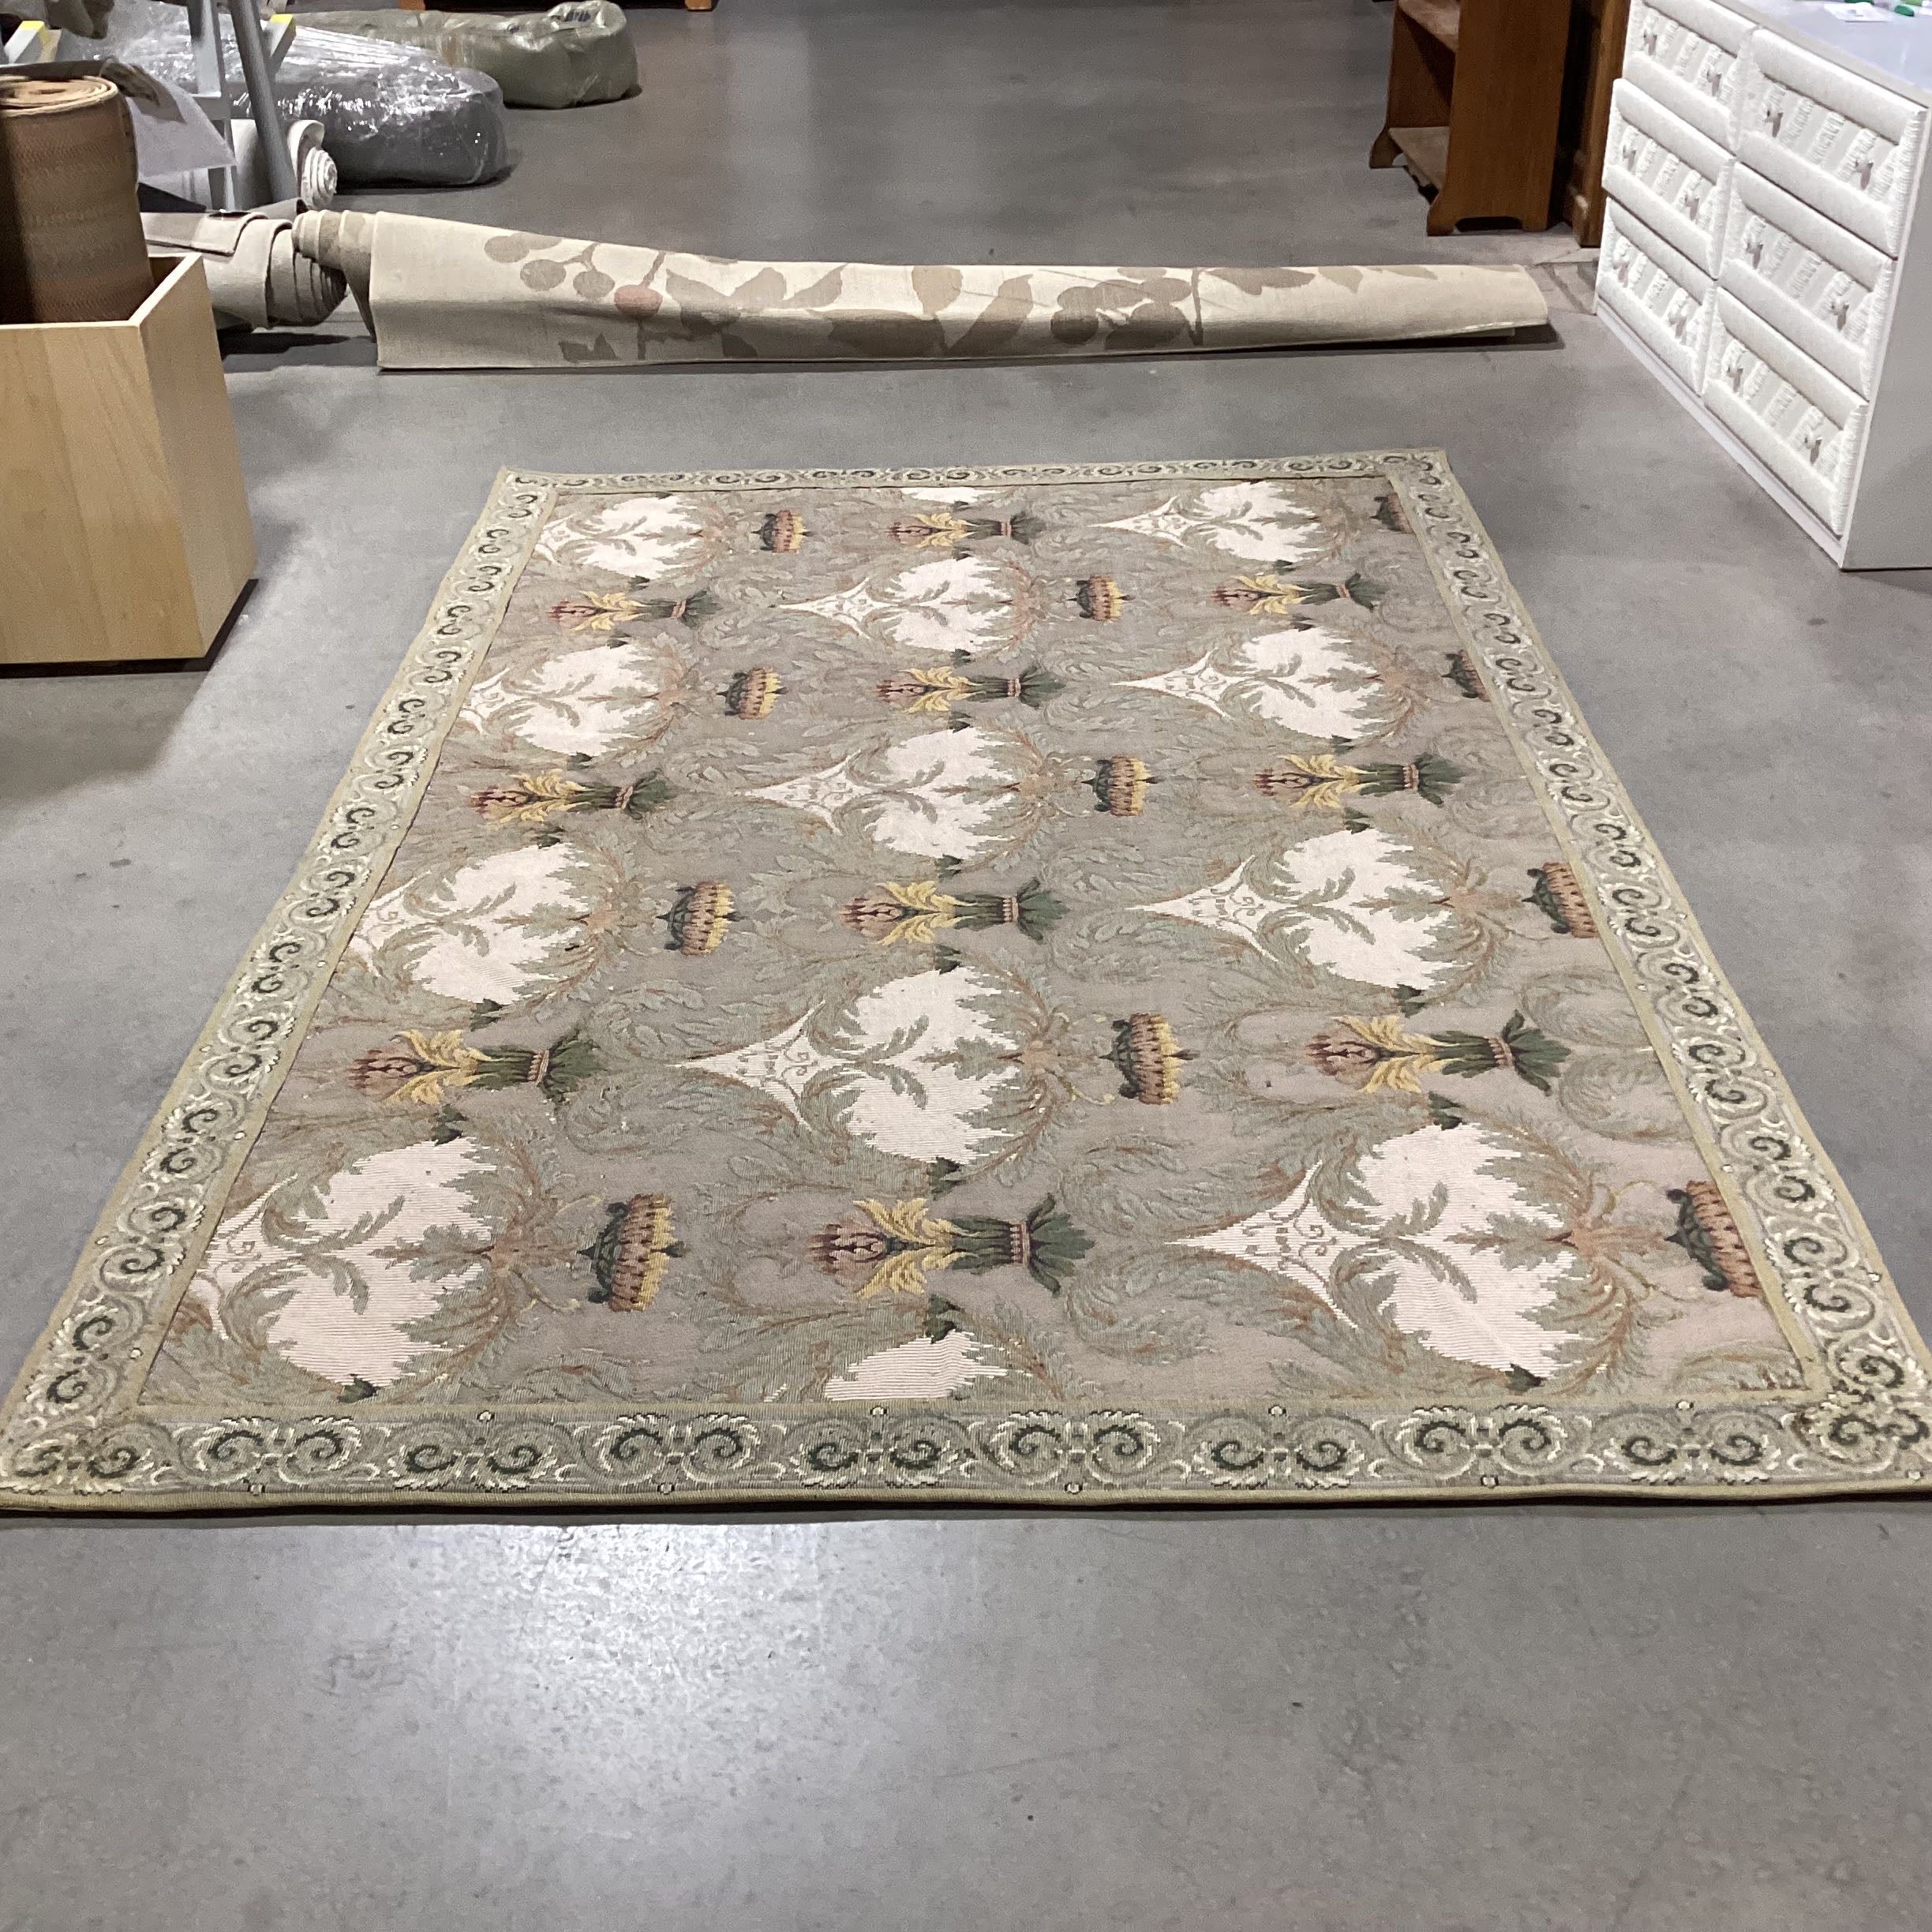 Anichini Green Gold Floral with Border Tapestry Style Rug